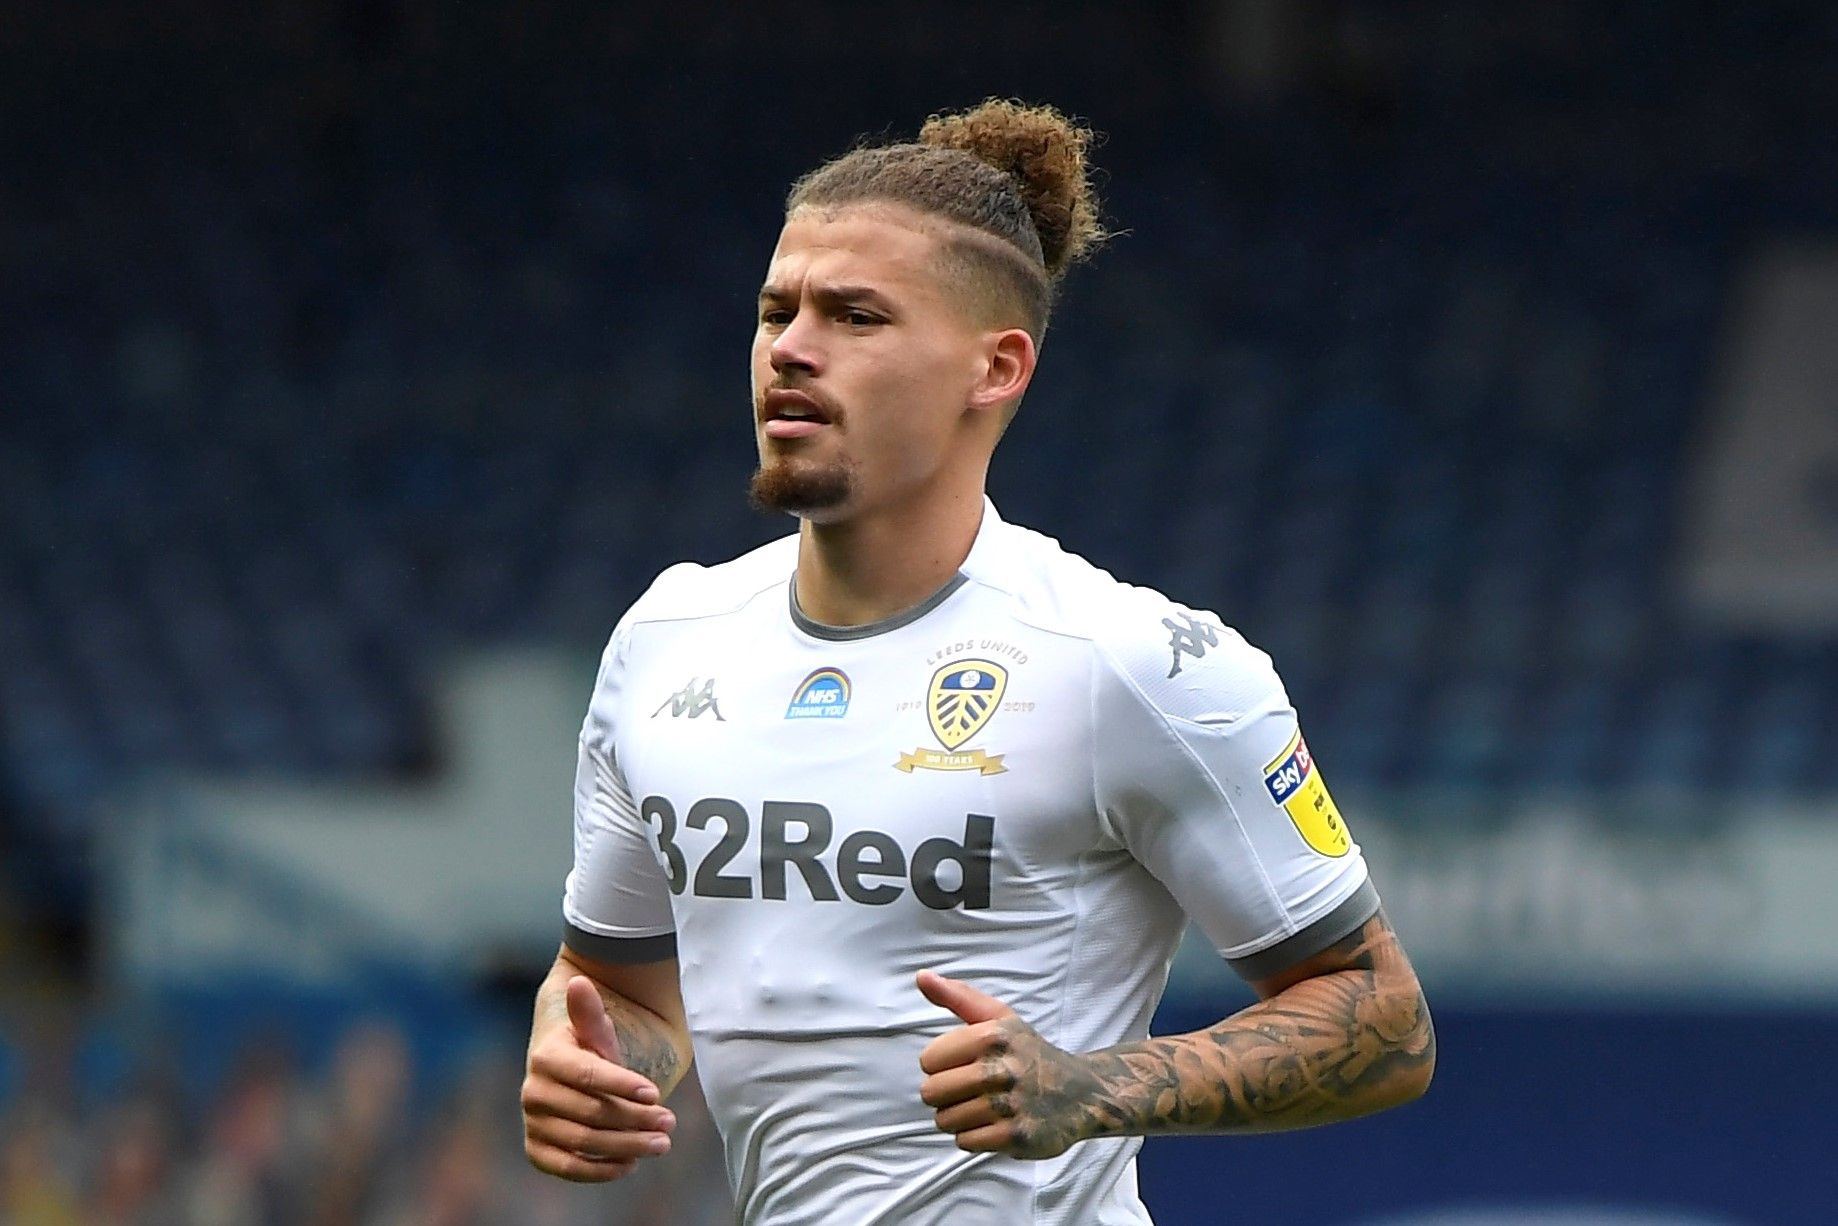 Promoted stars: Phillips the main man for Leeds